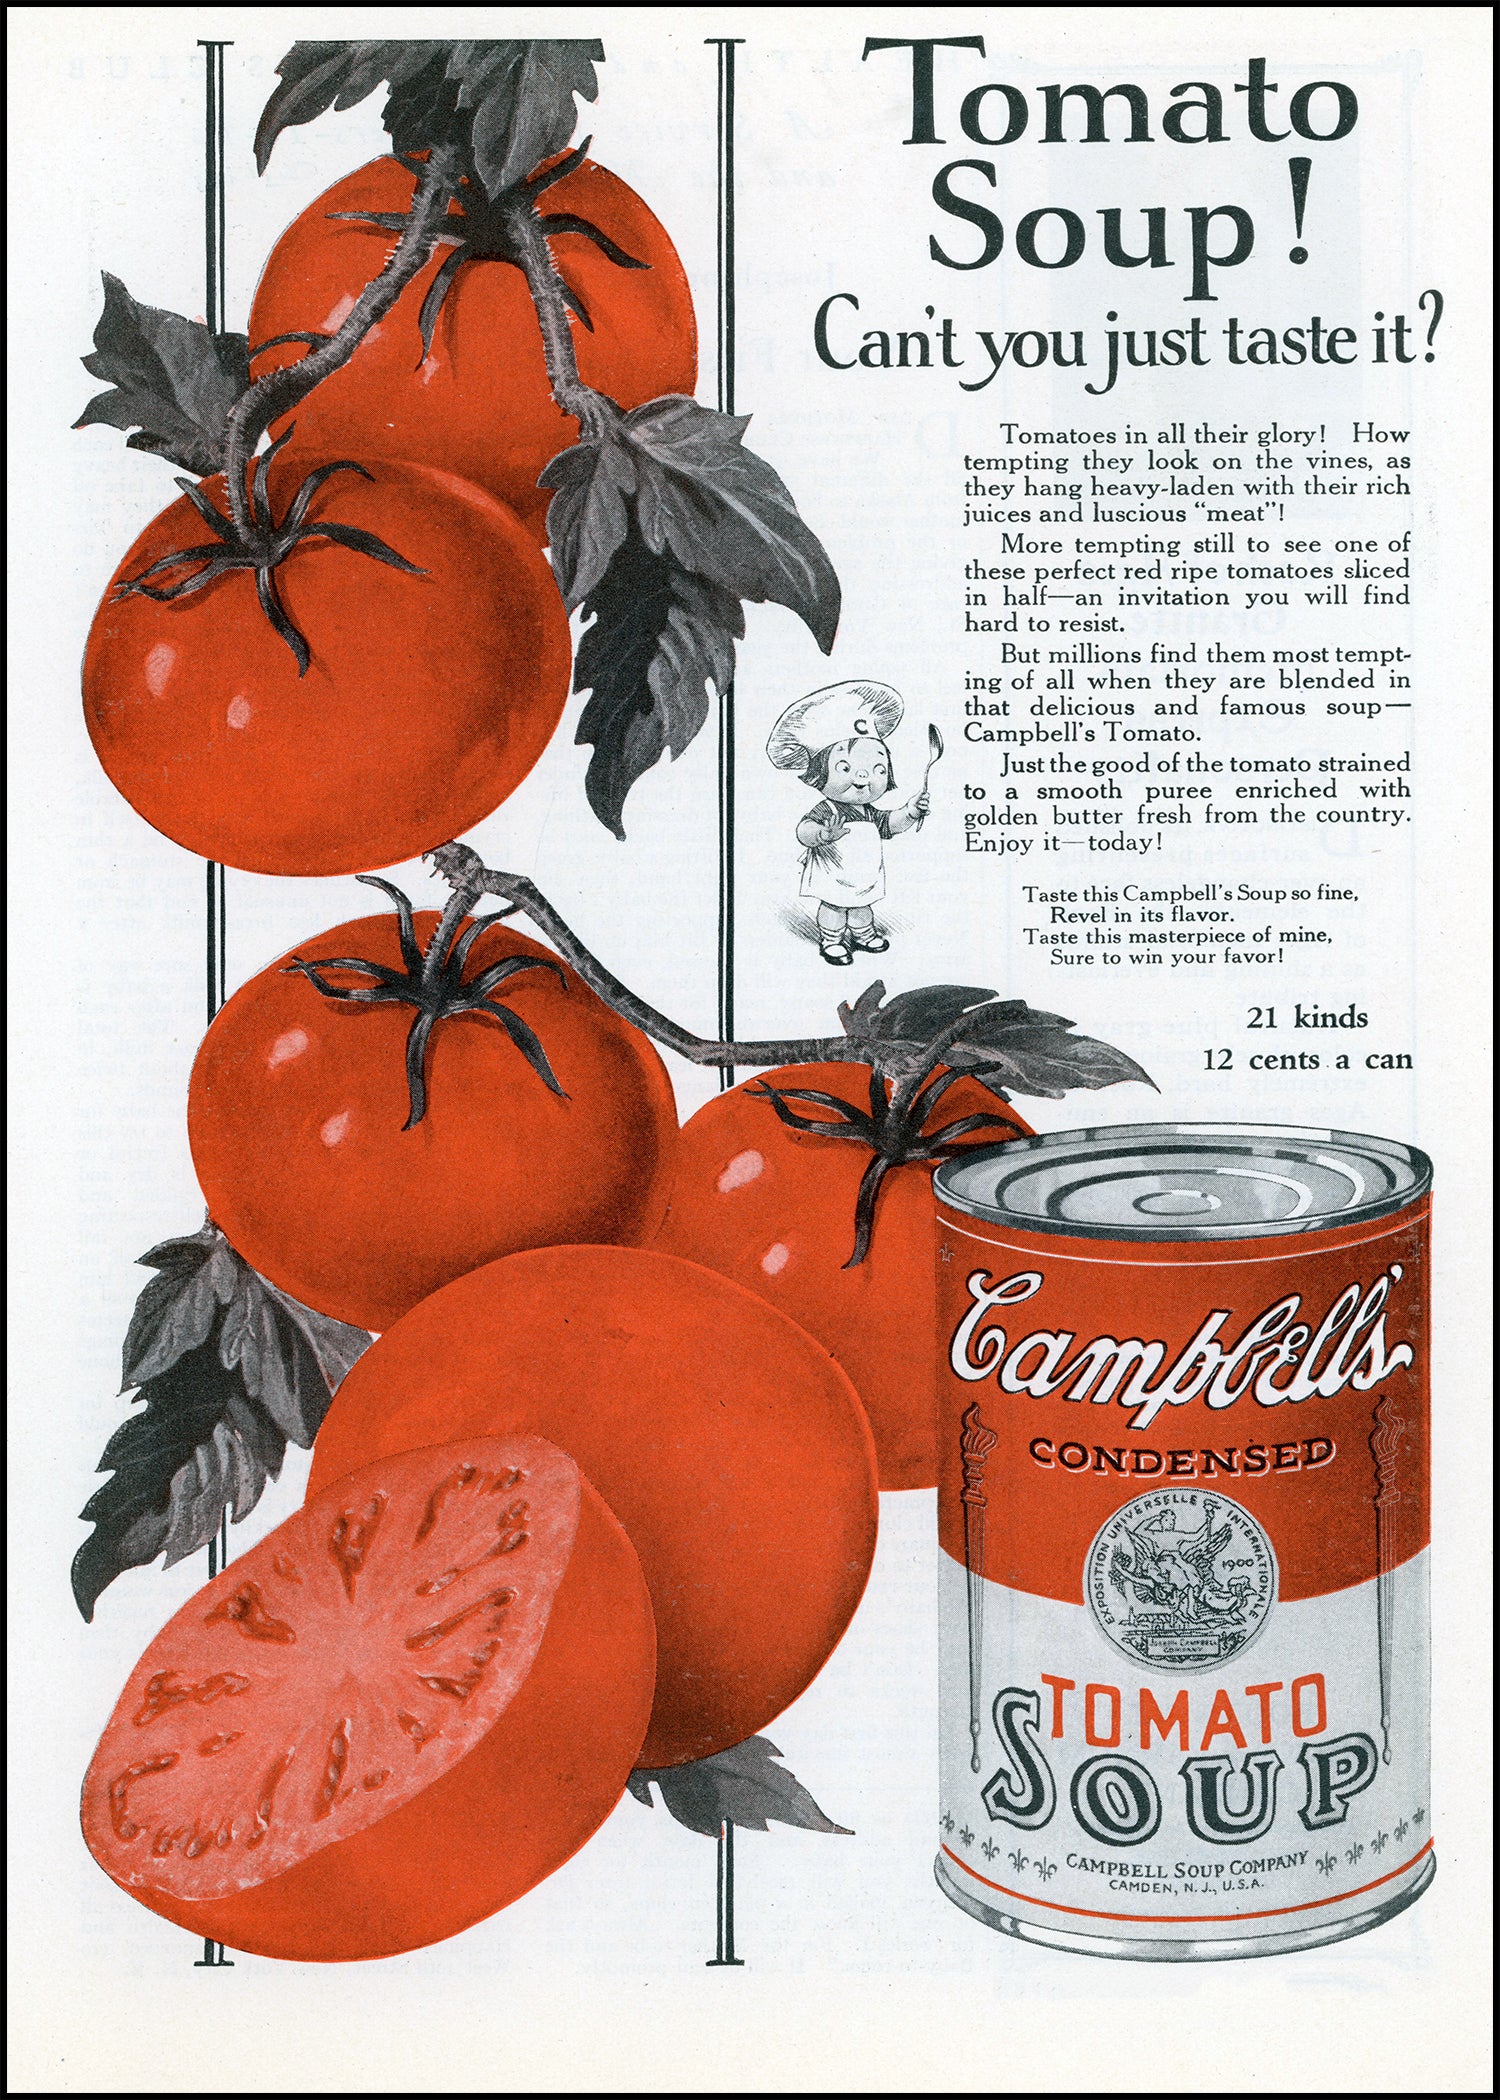 Antique and Vintage Food Ads From Adirondack Retro